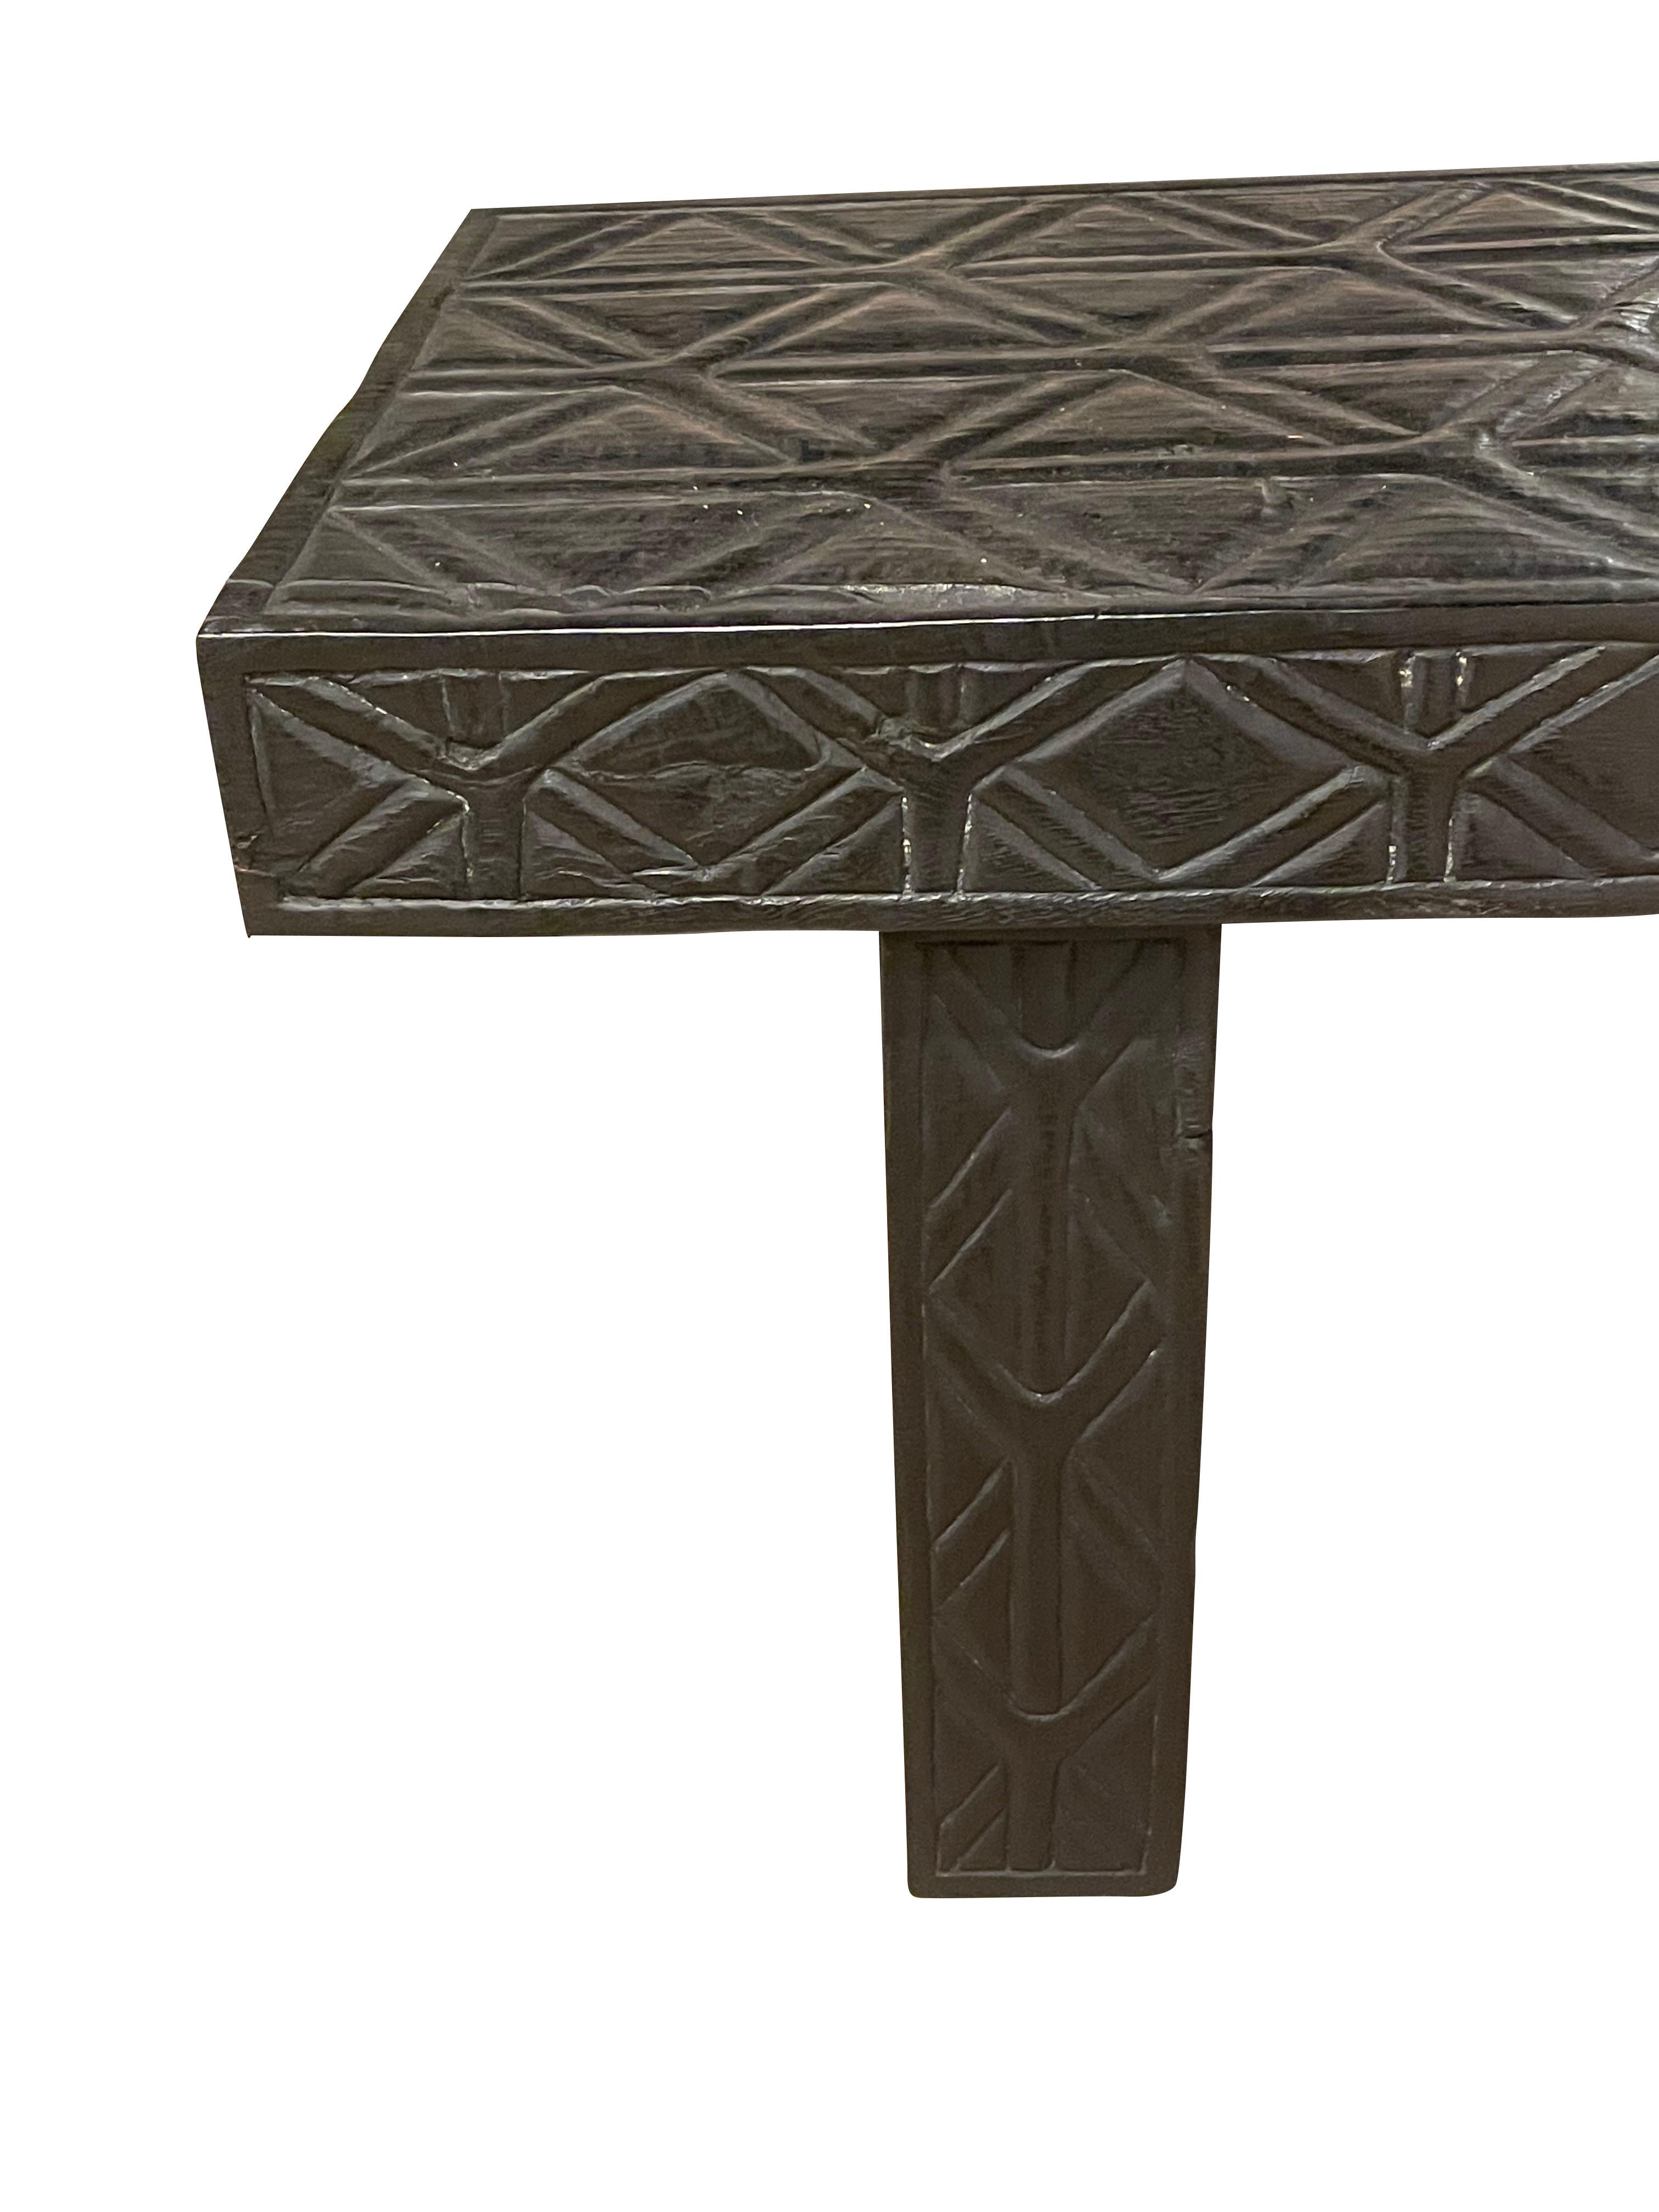 Contemporary Indonesian ebonized bench with decorative carving.
ARRIVING NOVEMBER